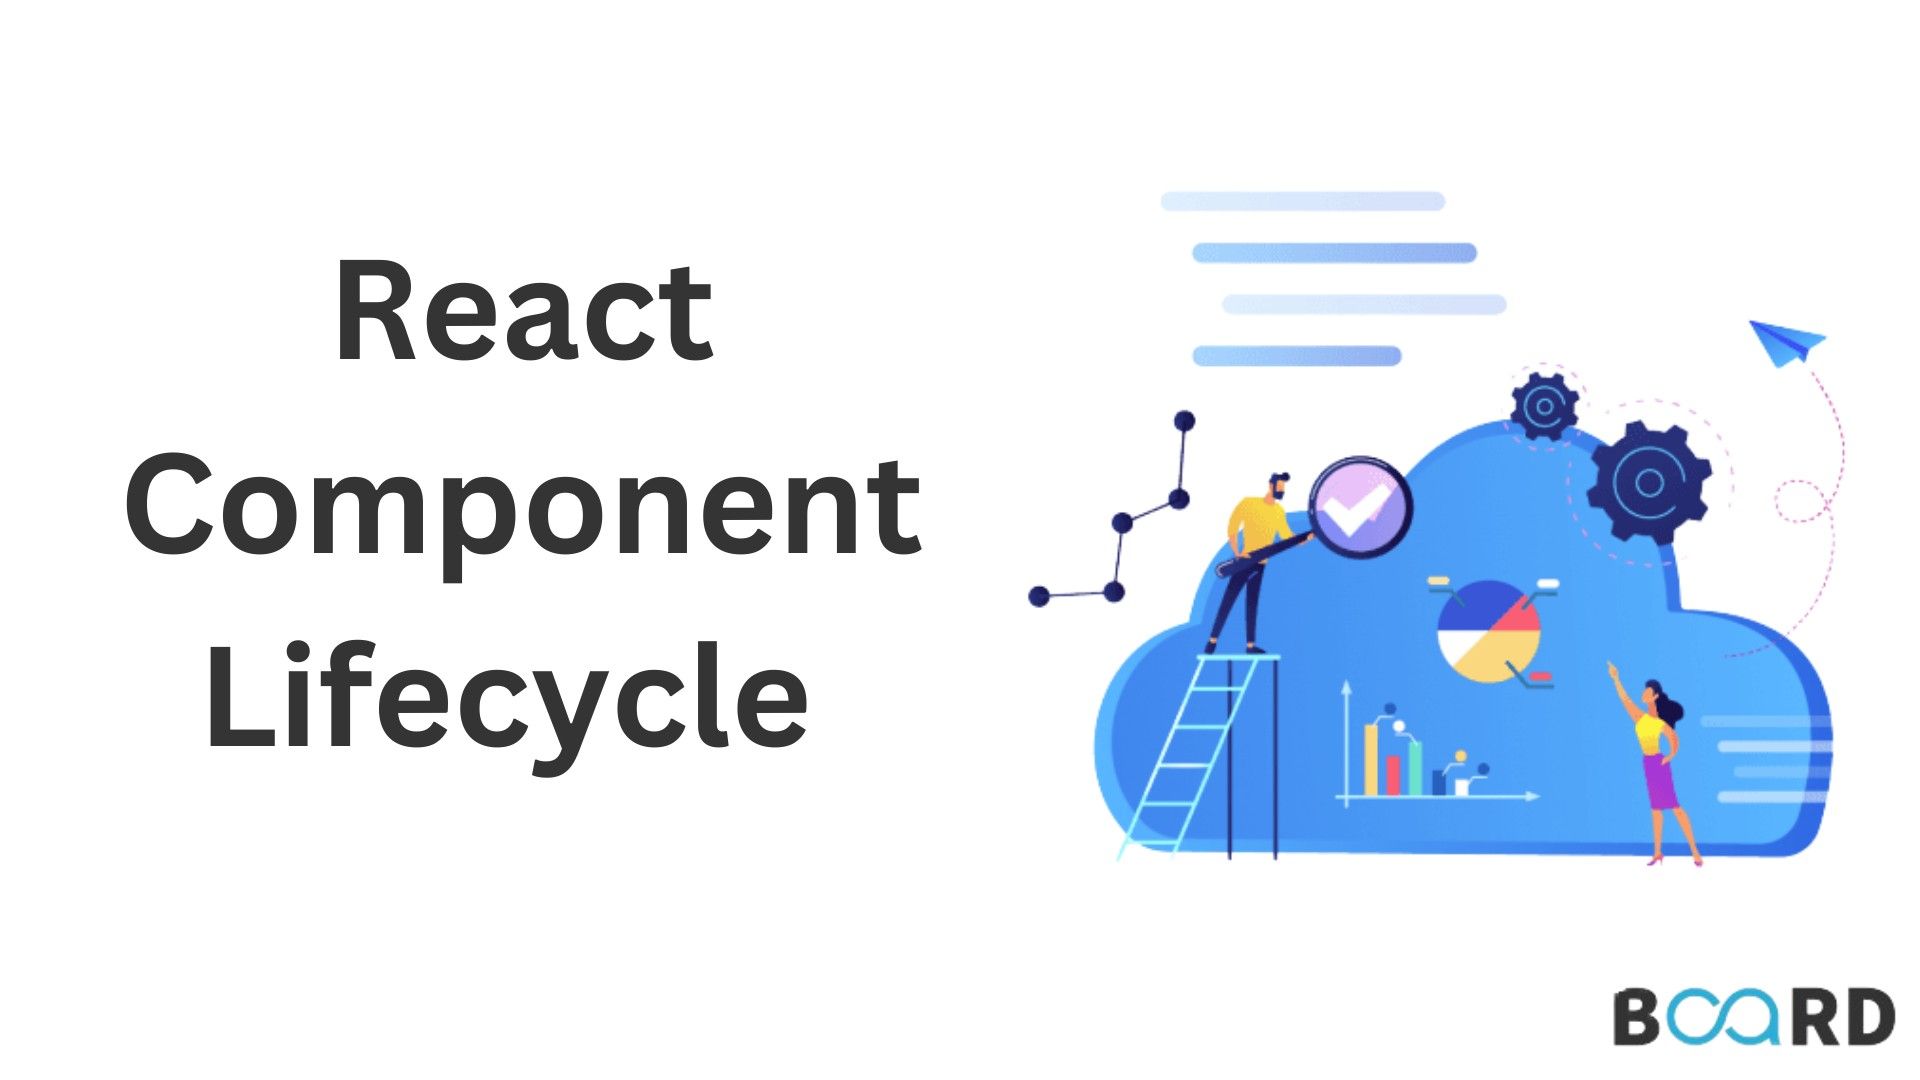 What Is The React Component Lifecycle?